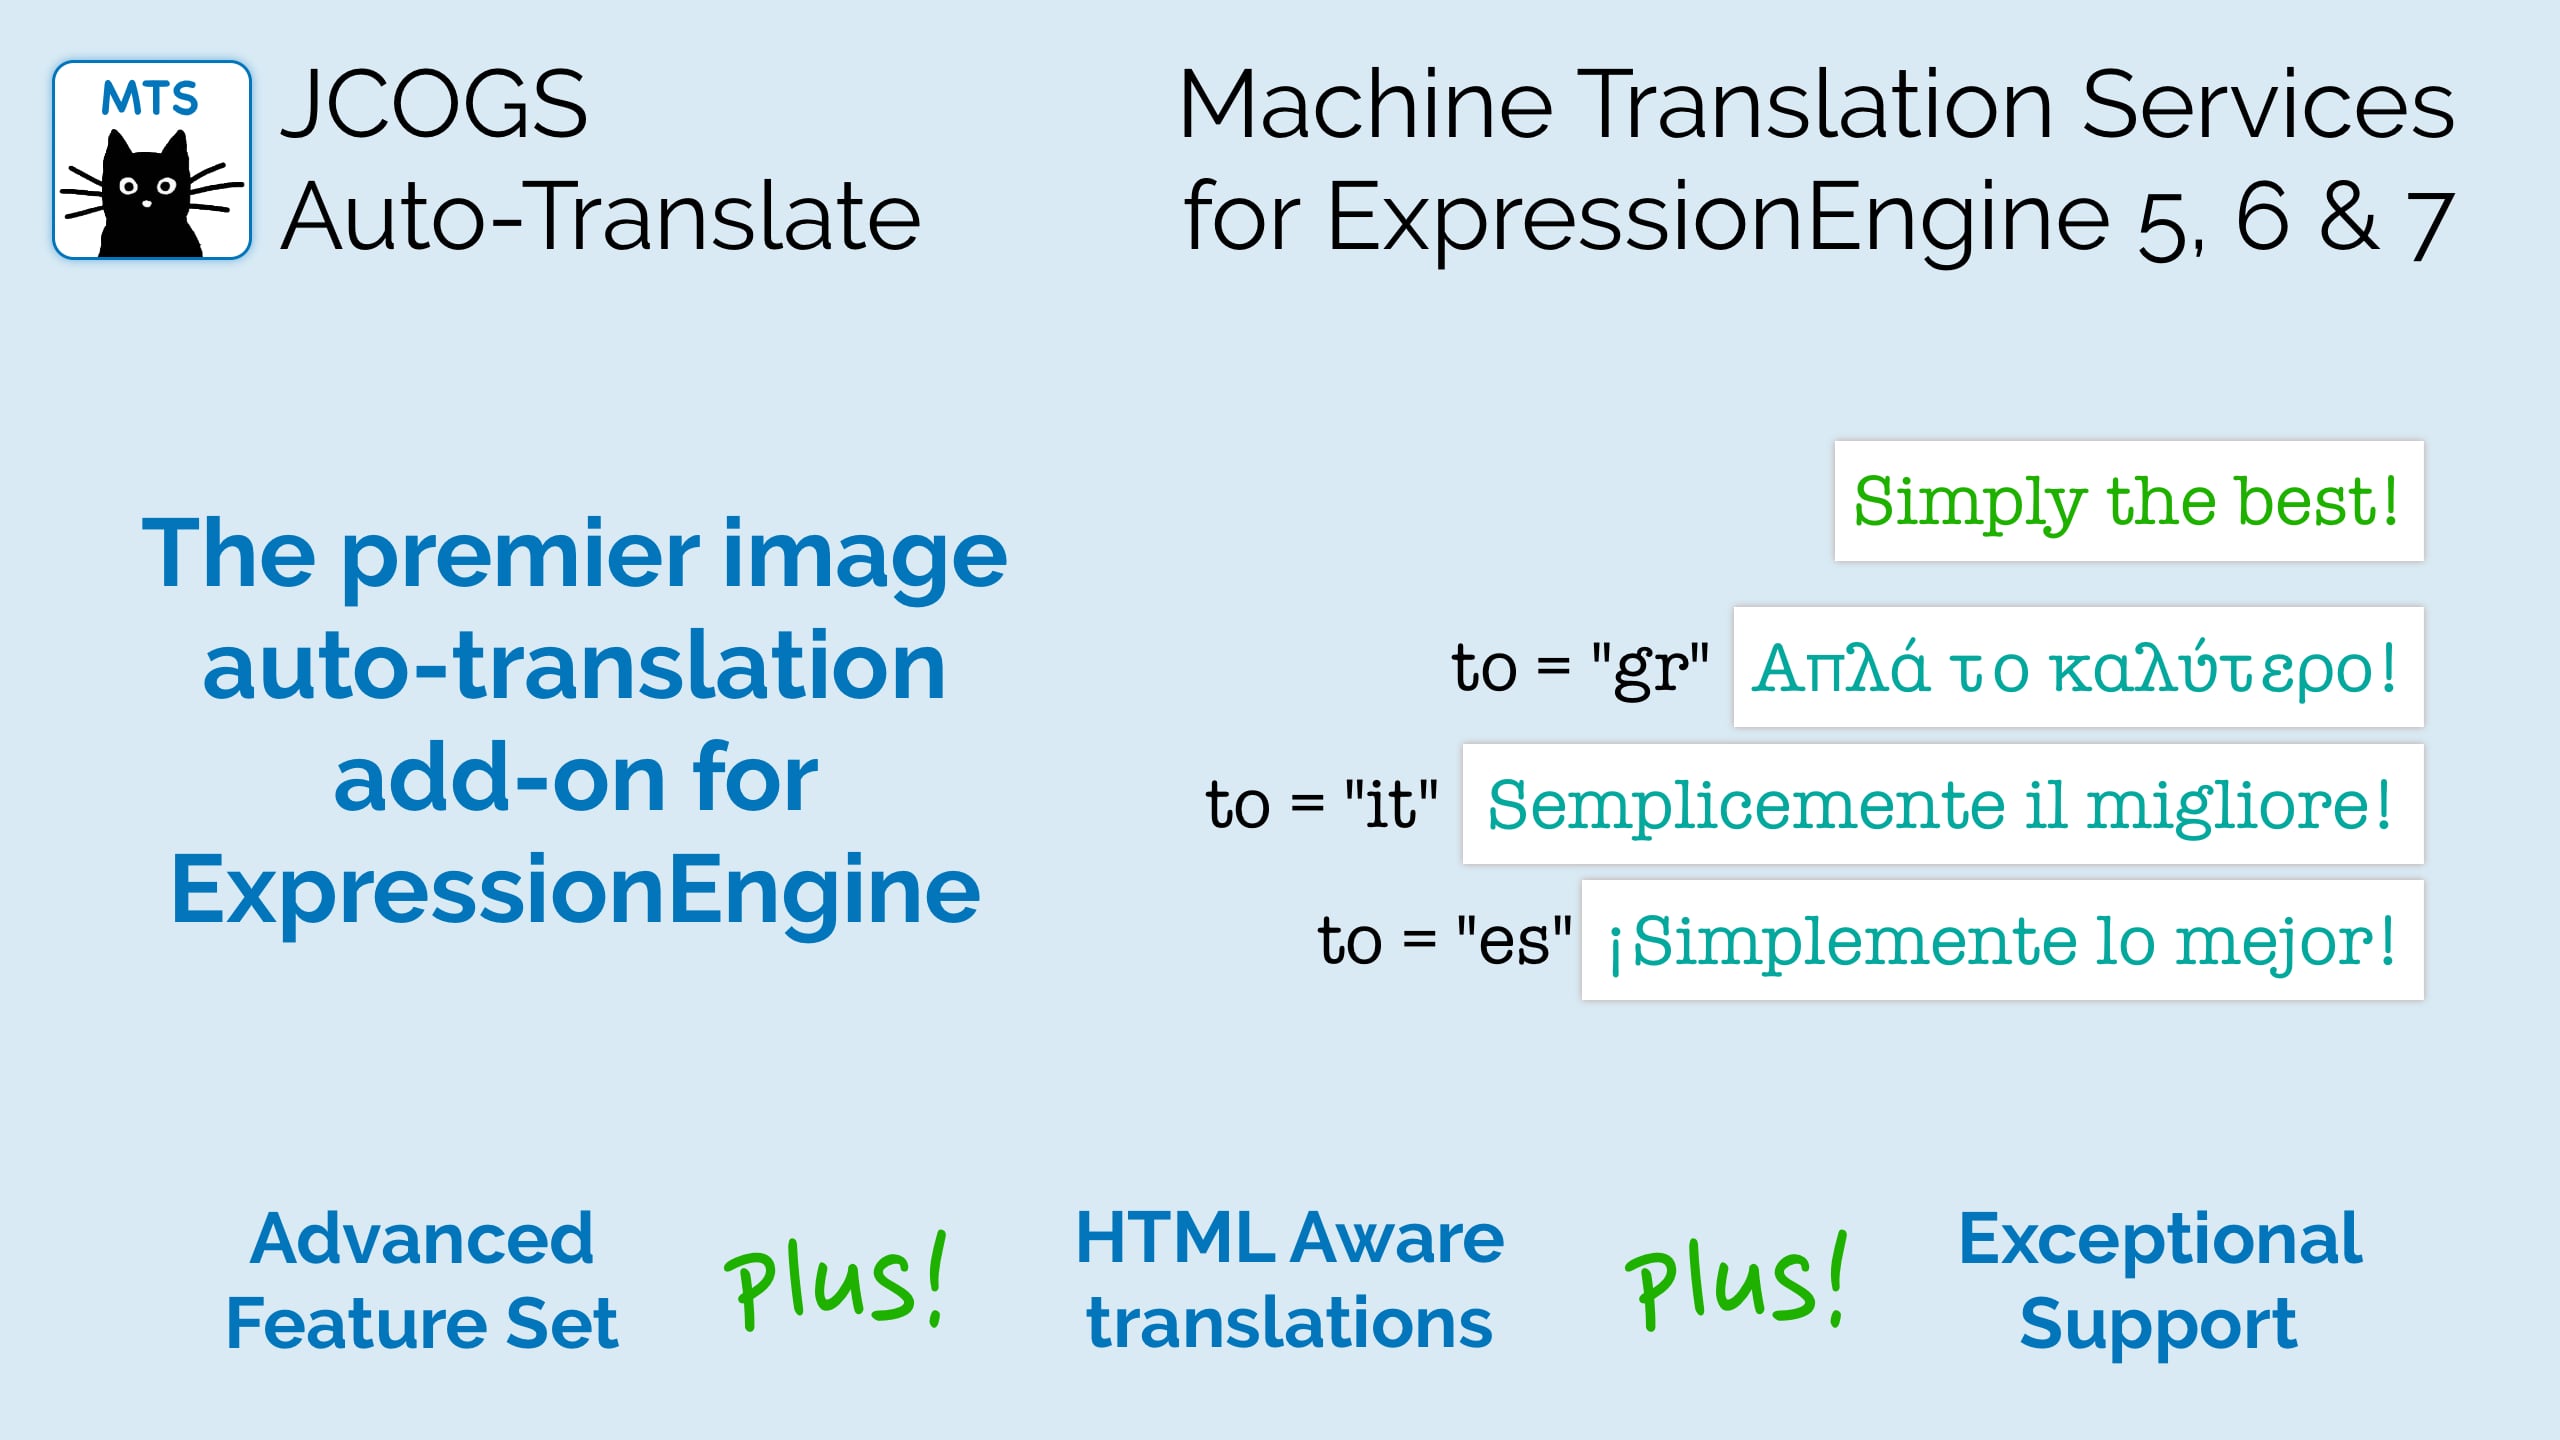 The premier Auto-Translation add-on for EE5 and EE6